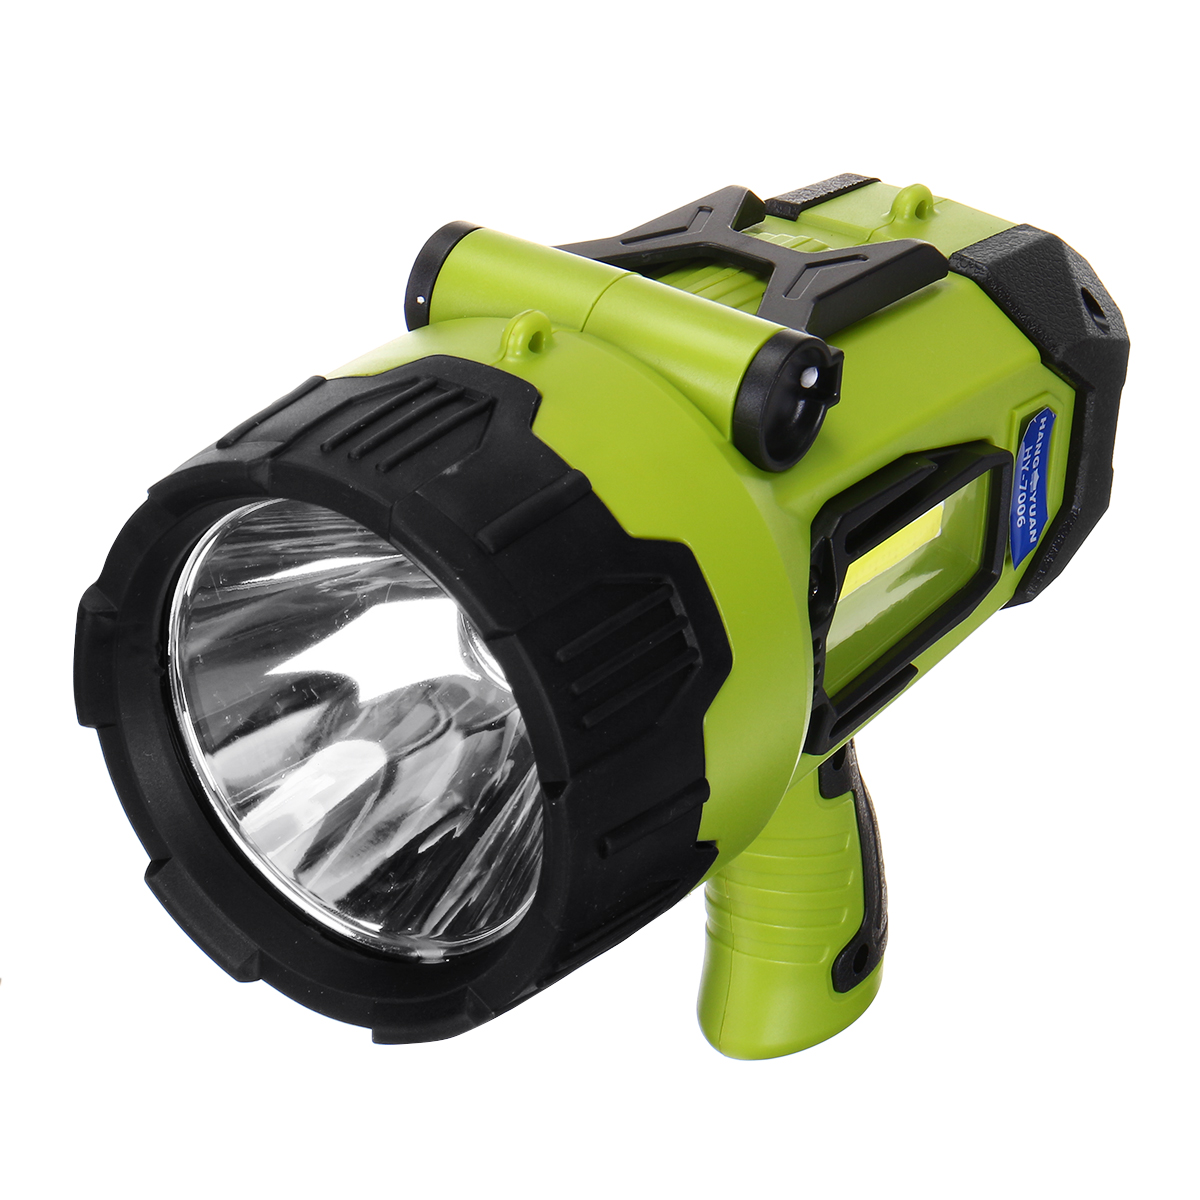 Rechargeable spotlight, Spot lights hand held large flashlight 5000 lumens handheld spotlight Lightweight and Super bright flashlight, for fishing and hunting, forestry, adventure - image 3 of 7